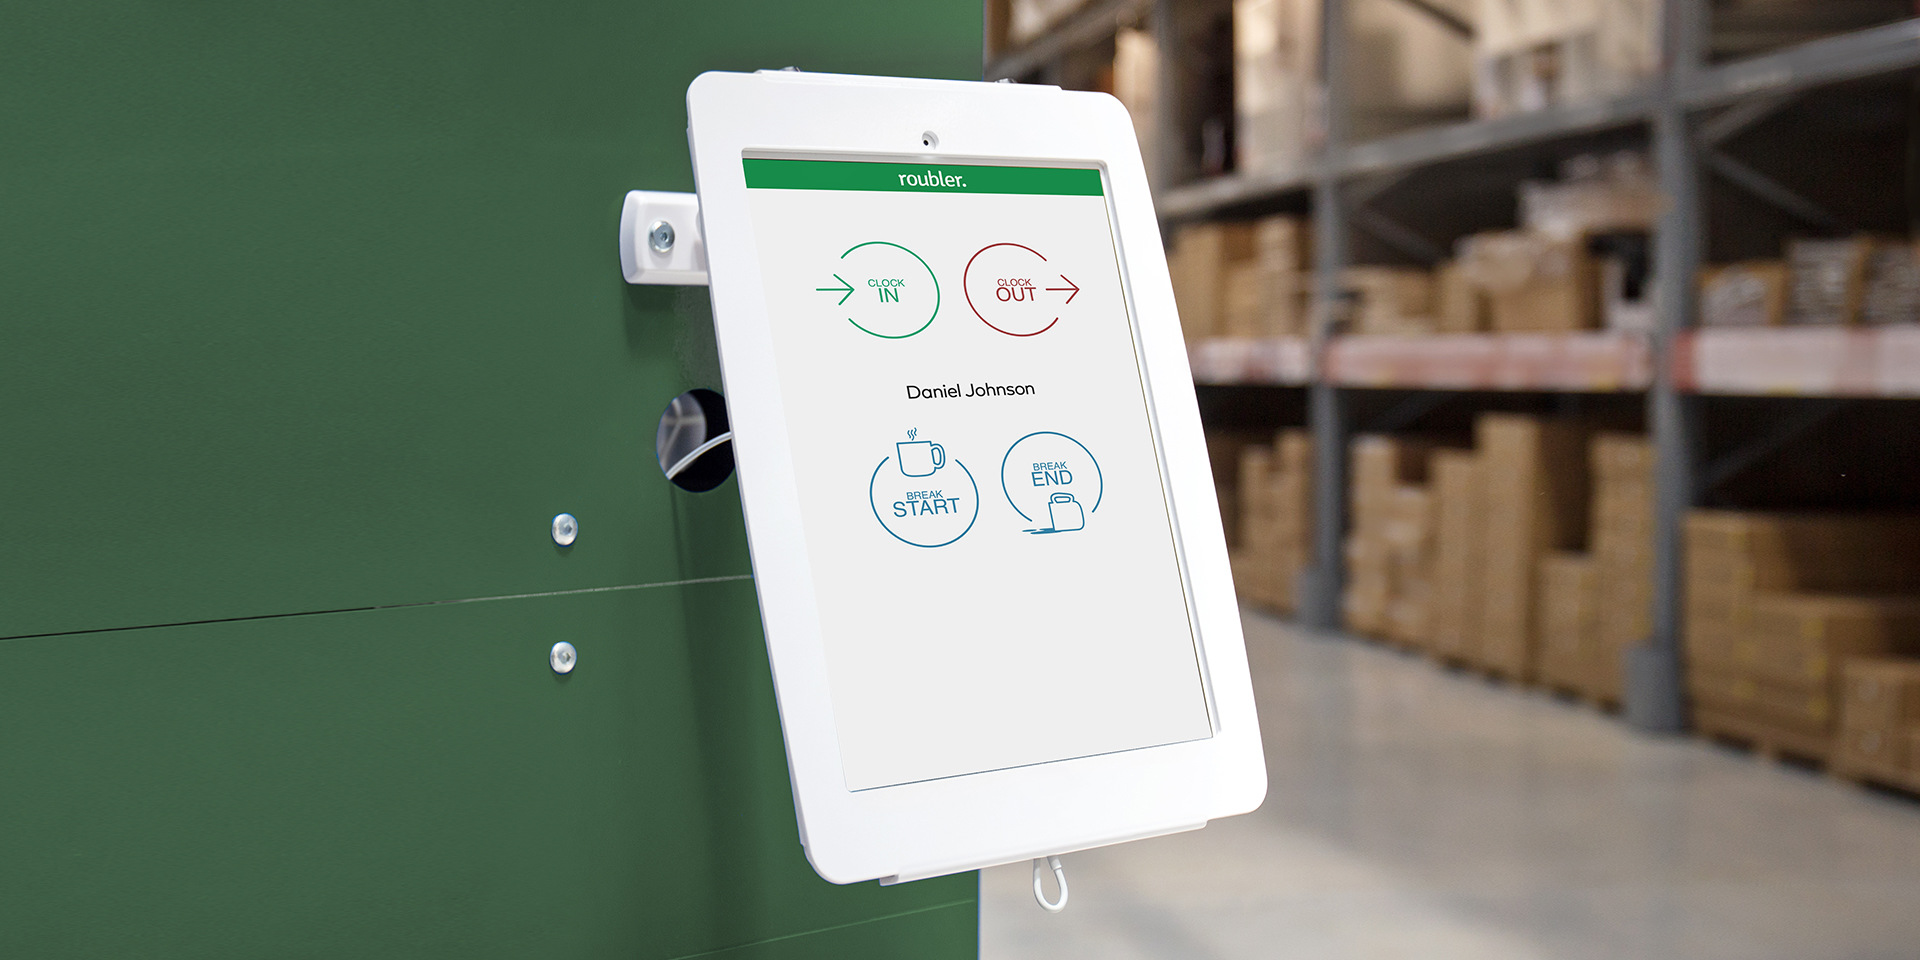 Roubler Software - Capture accurate time and attendance data by letting your team easily clock in and out of their shift from their mobile phone or via kiosk in a common area.